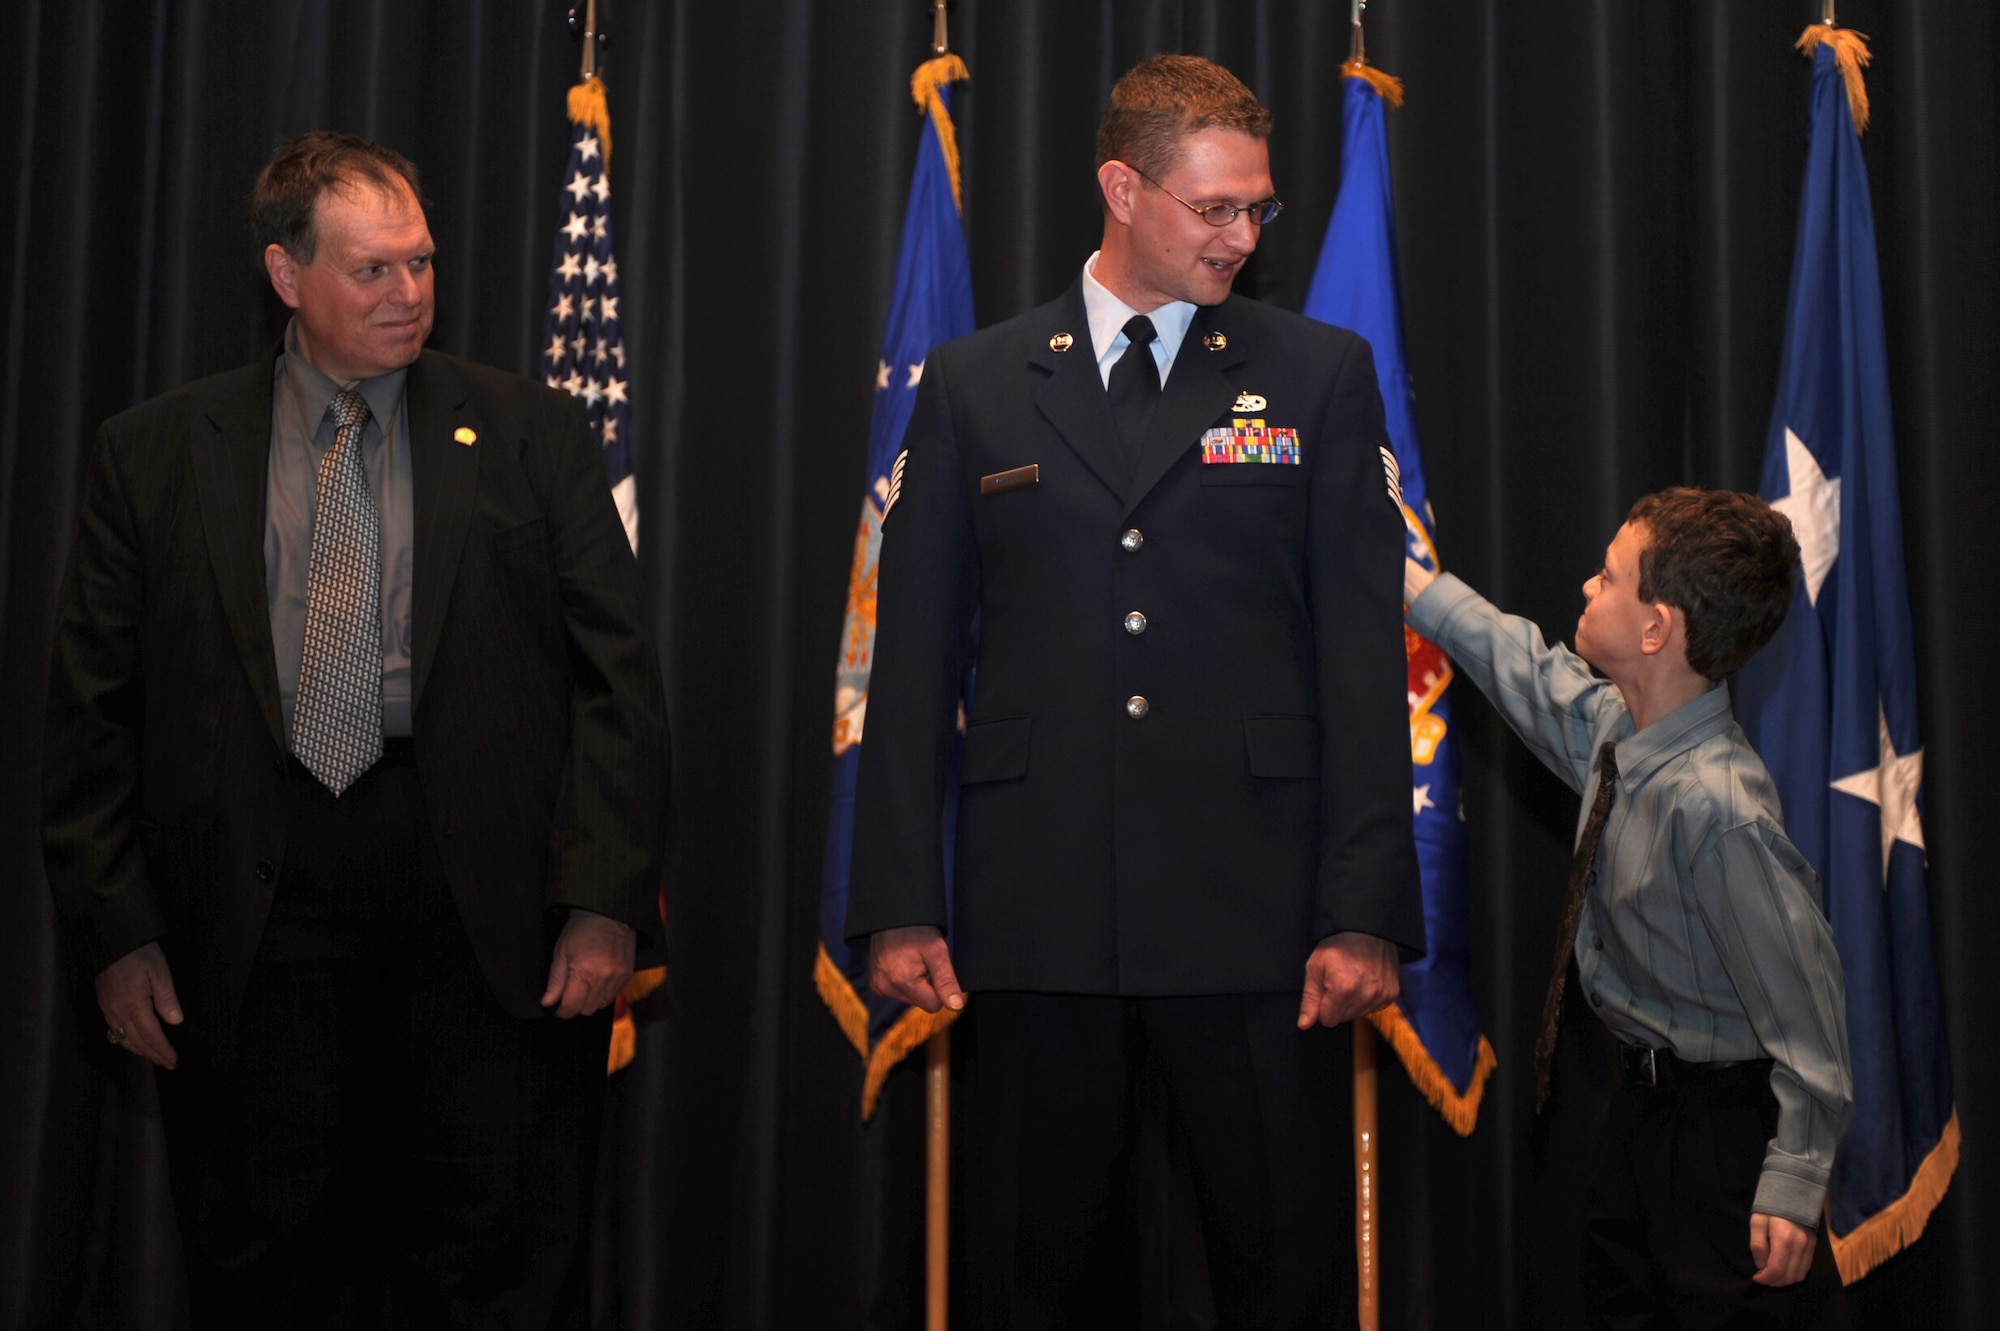 Tech. Sgt. Jonathan McClure, Mobile Command and Control Environmental Control Unit Course director in the U.S. Air Force Expeditionary Center's Mobility Operations School, gets his newly promoted stripes tacked on by his 8-year-old son, Ryan McClure, and father, Gary McClure, during a U.S Air Force Expeditionary Center promotion ceremony at Fort Dix, NJ, Jan. 8, 2009. Sergeant McClure's effective date of promotion was Jan. 1.  (U.S. Air Force Photo/Staff Sgt. Nathan Bevier)